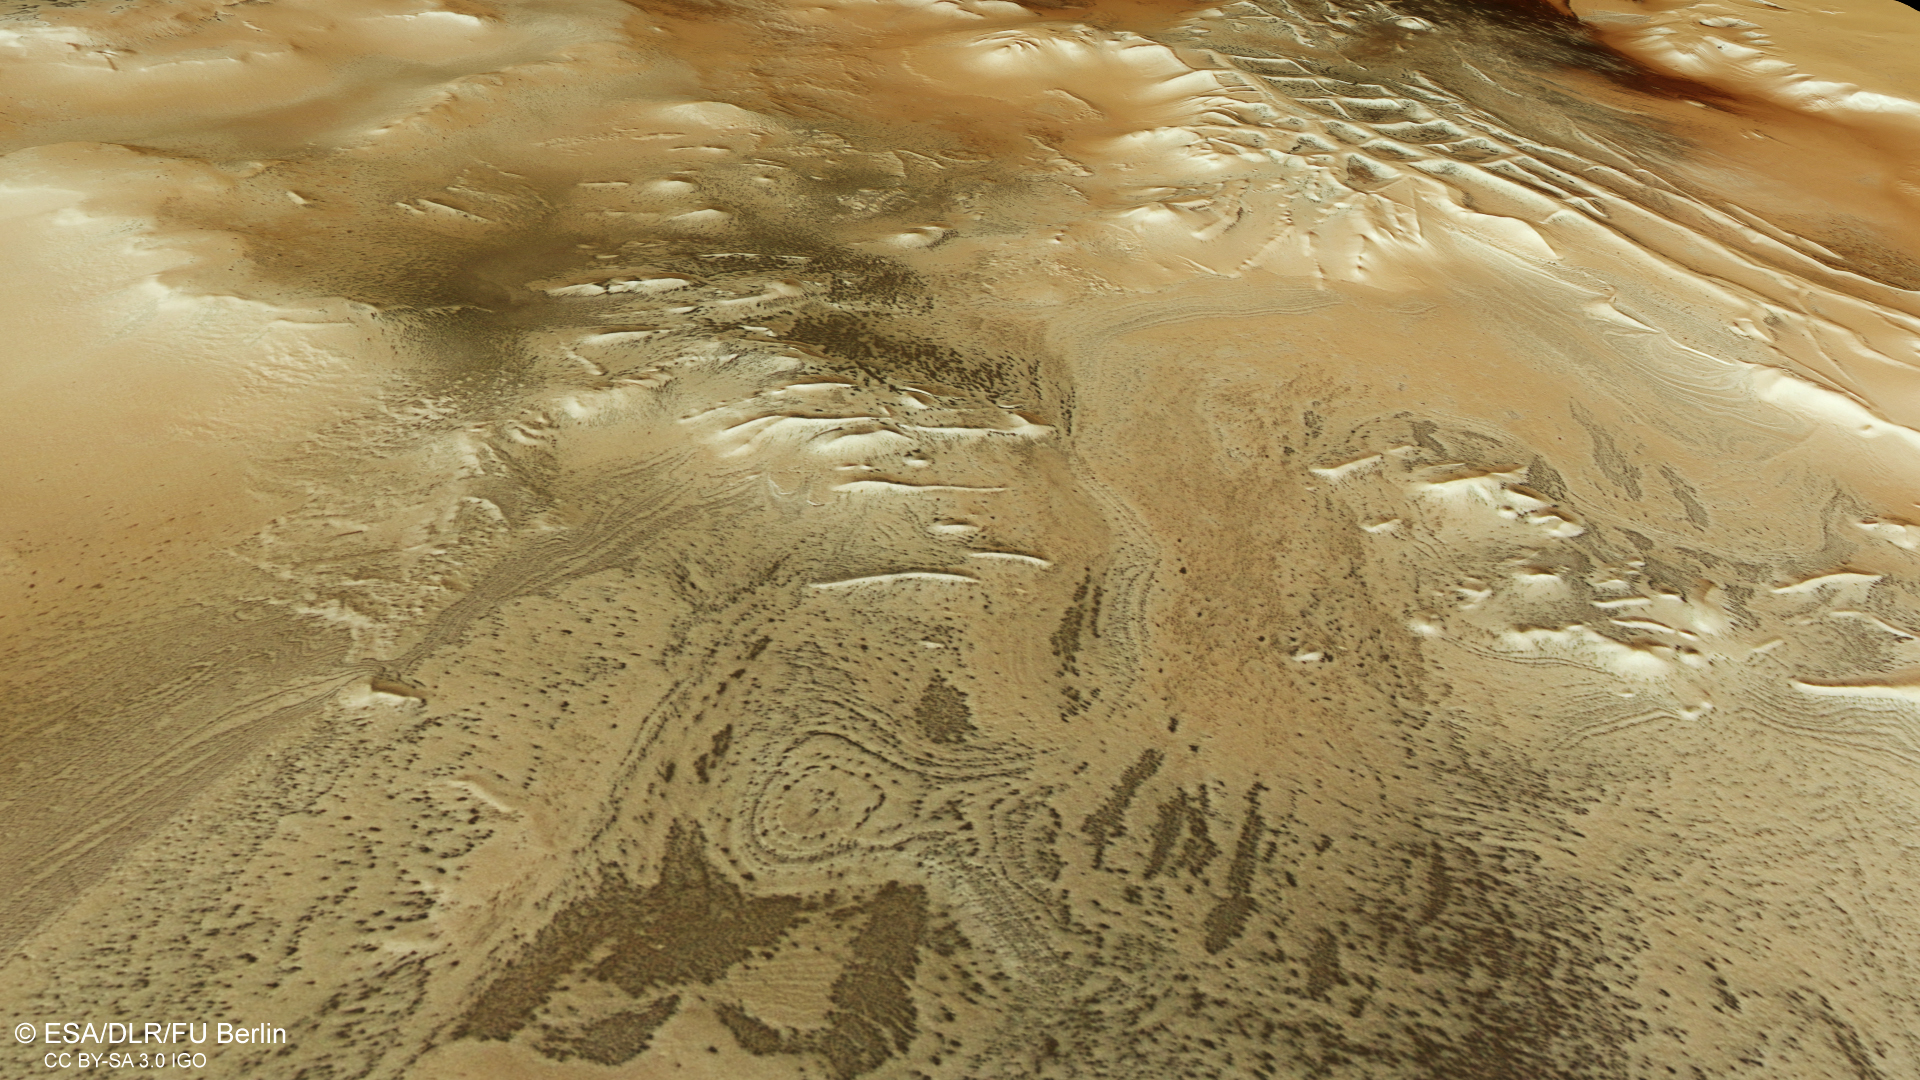 A digital model of Mars' Inca City formation made with recent data from the Mars Express’s High Resolution Stereo Camera